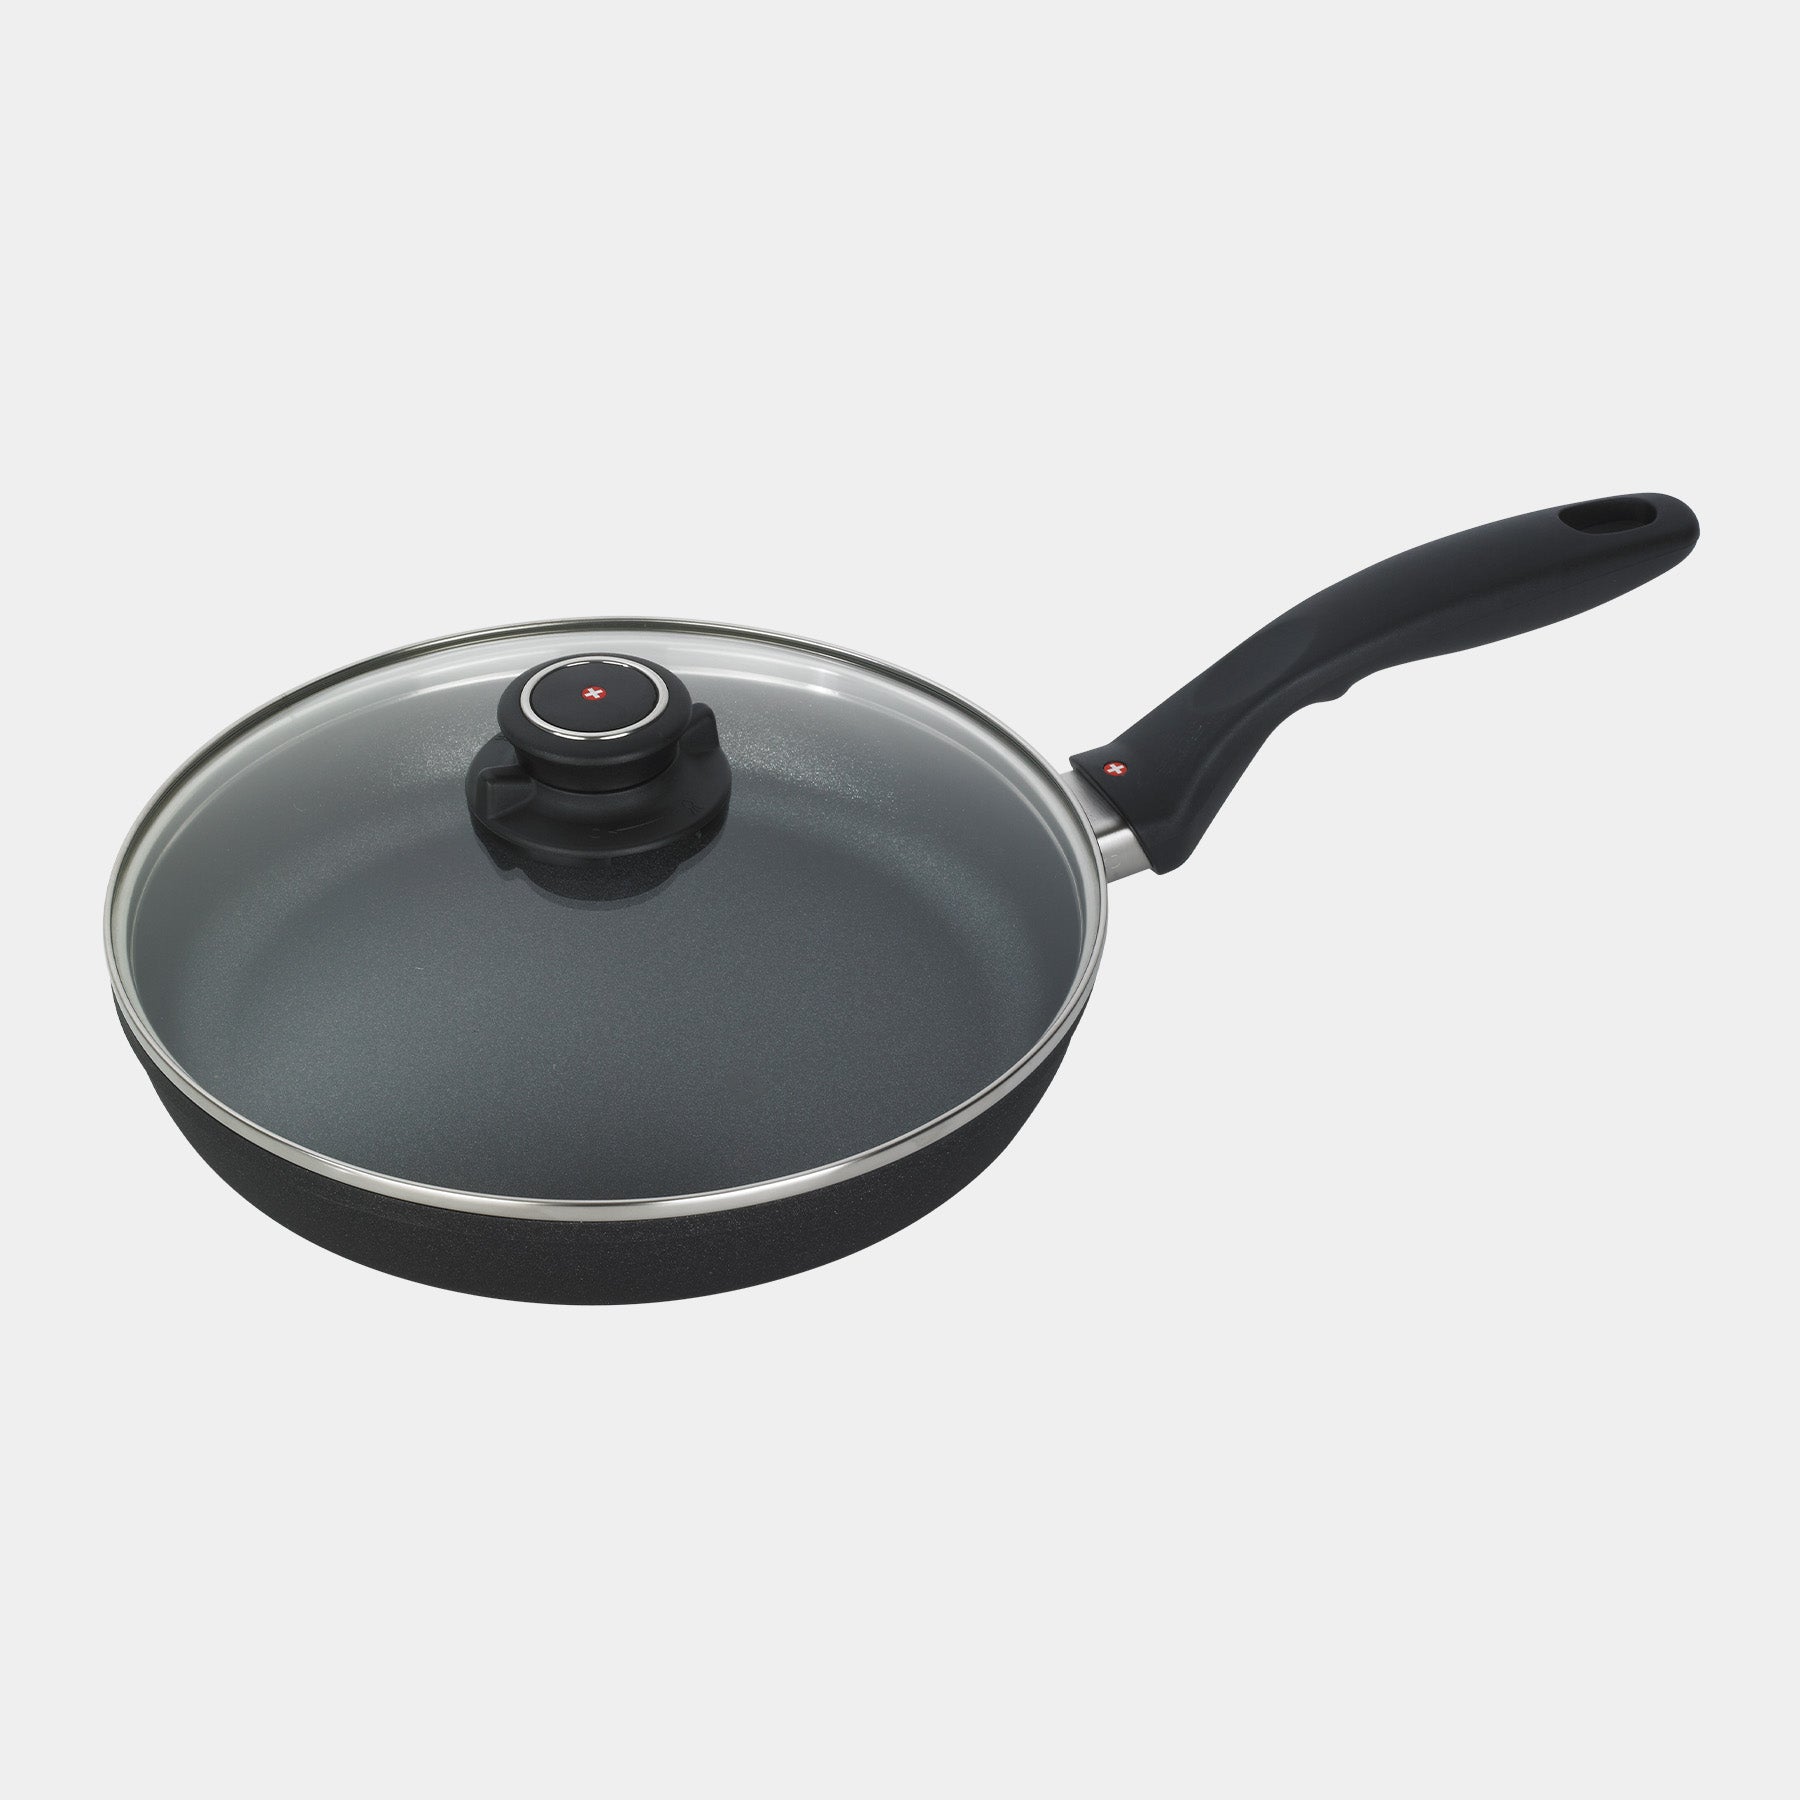 XD Nonstick 9.5" Fry Pan with glass lid - top view